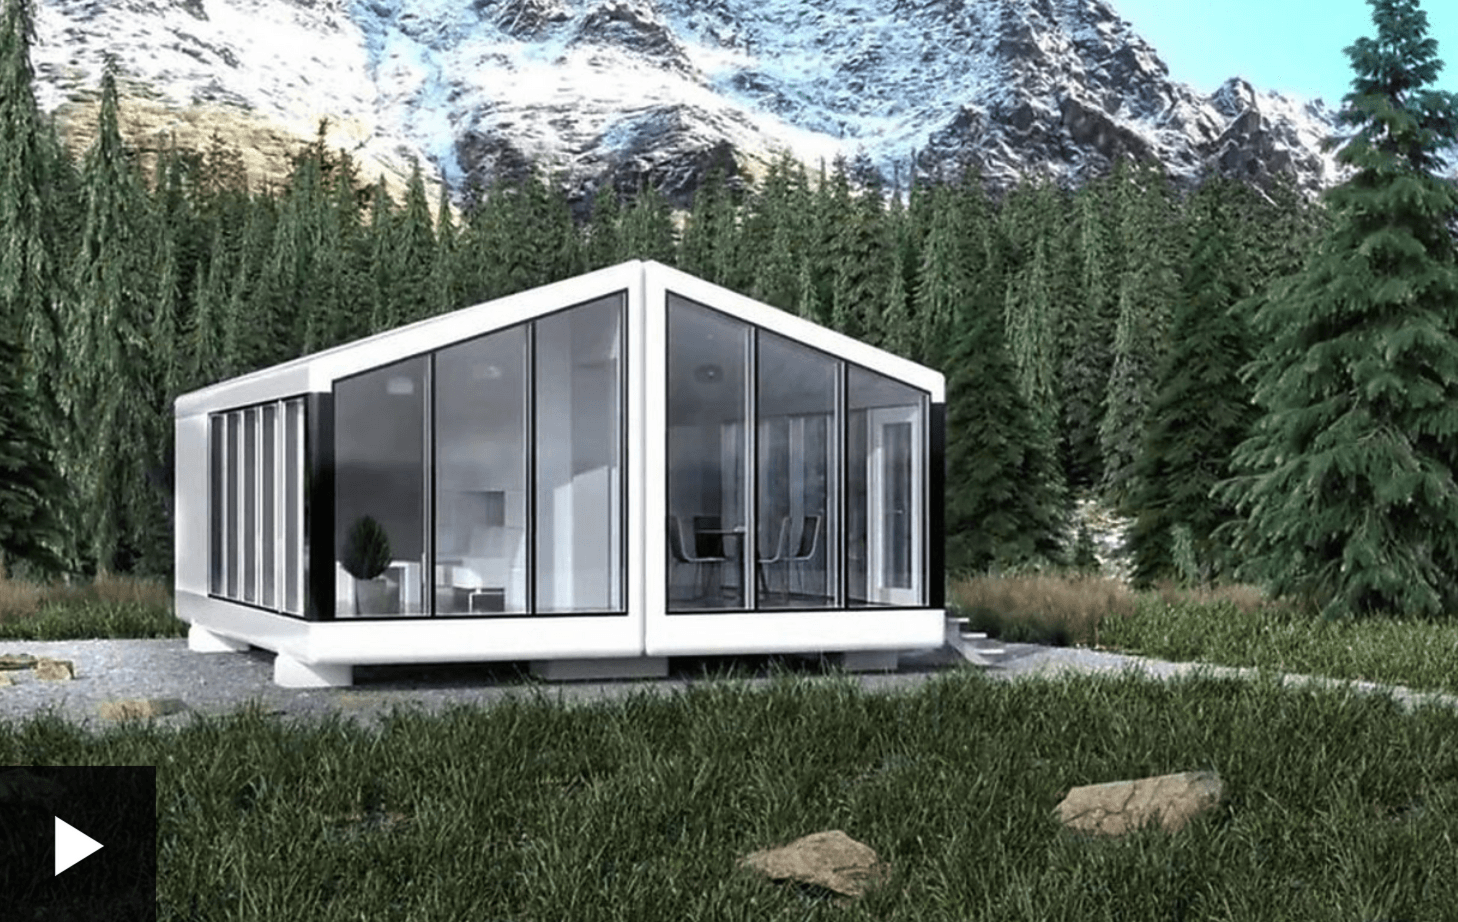 The 3D-printed house that runs off-grid